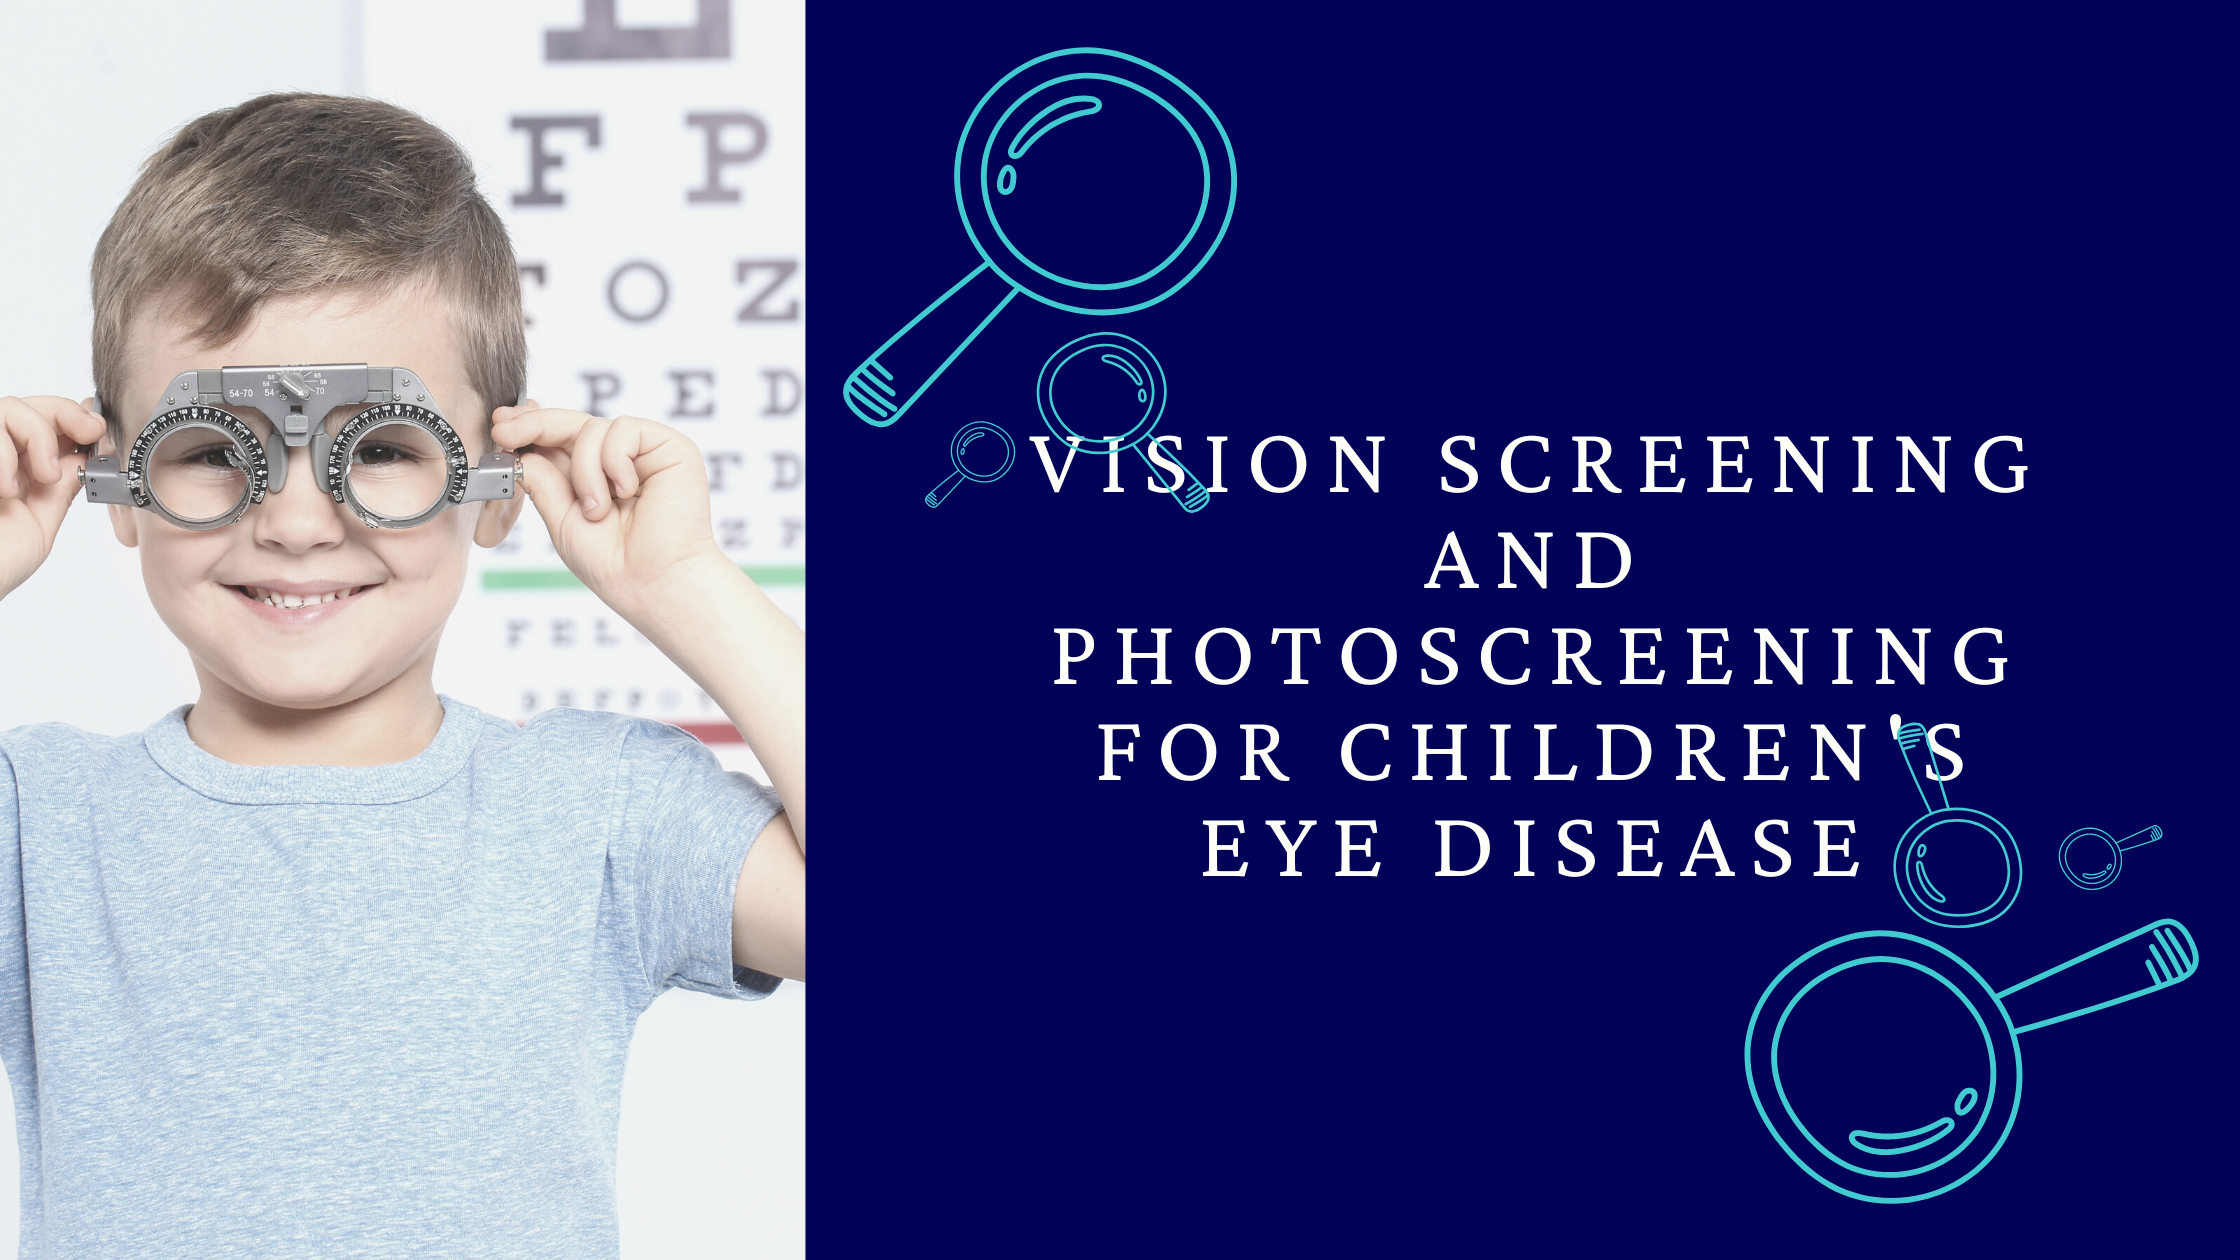 Vision Screening and Photoscreening for Children’s Eye Disease